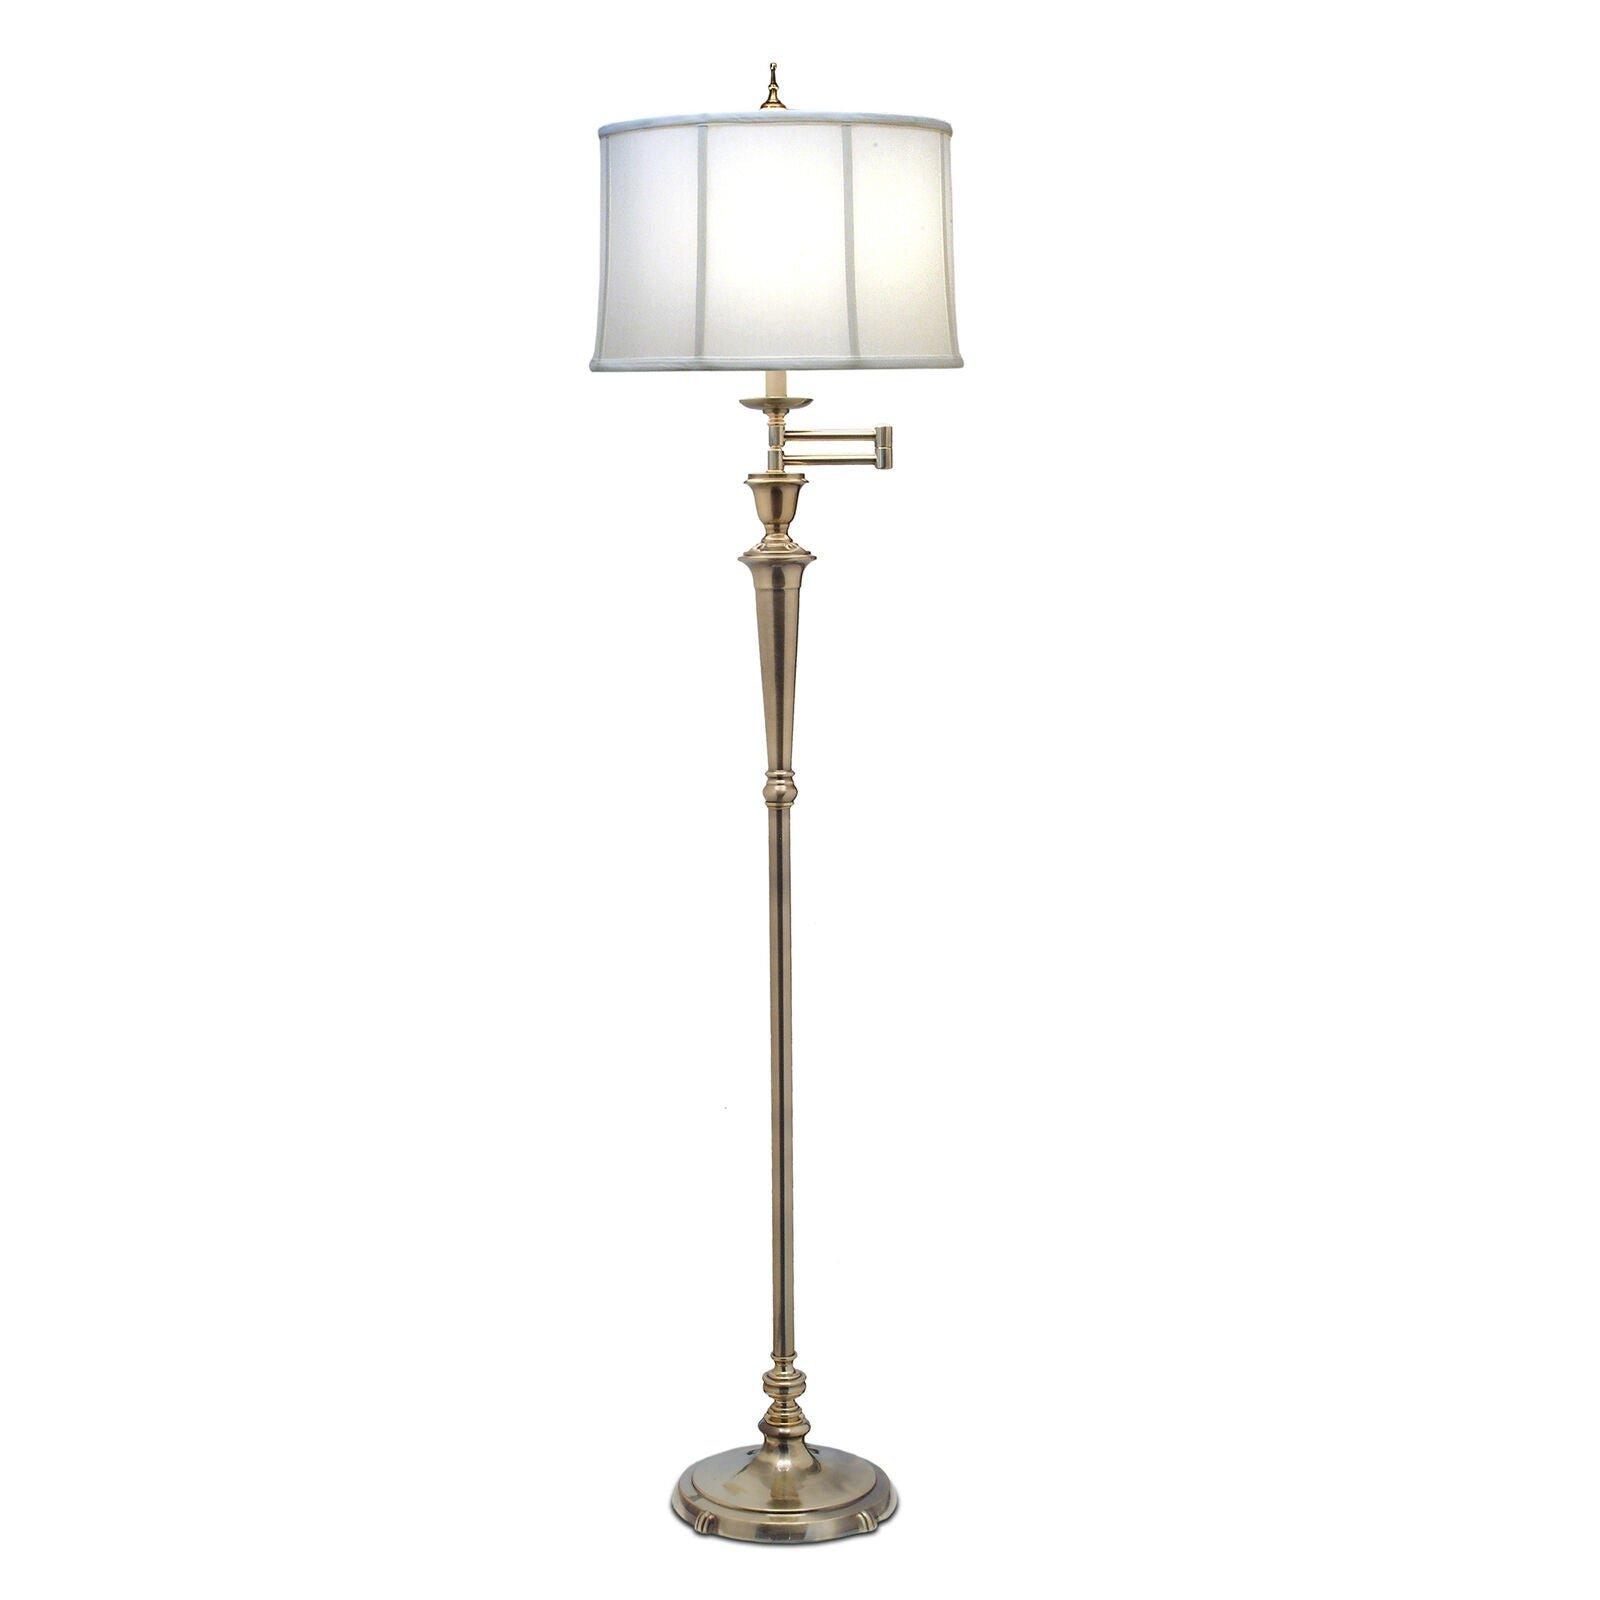 Floor Lamp Swing Arm Directional Off White Shade Burnished Brass LED E27 60W